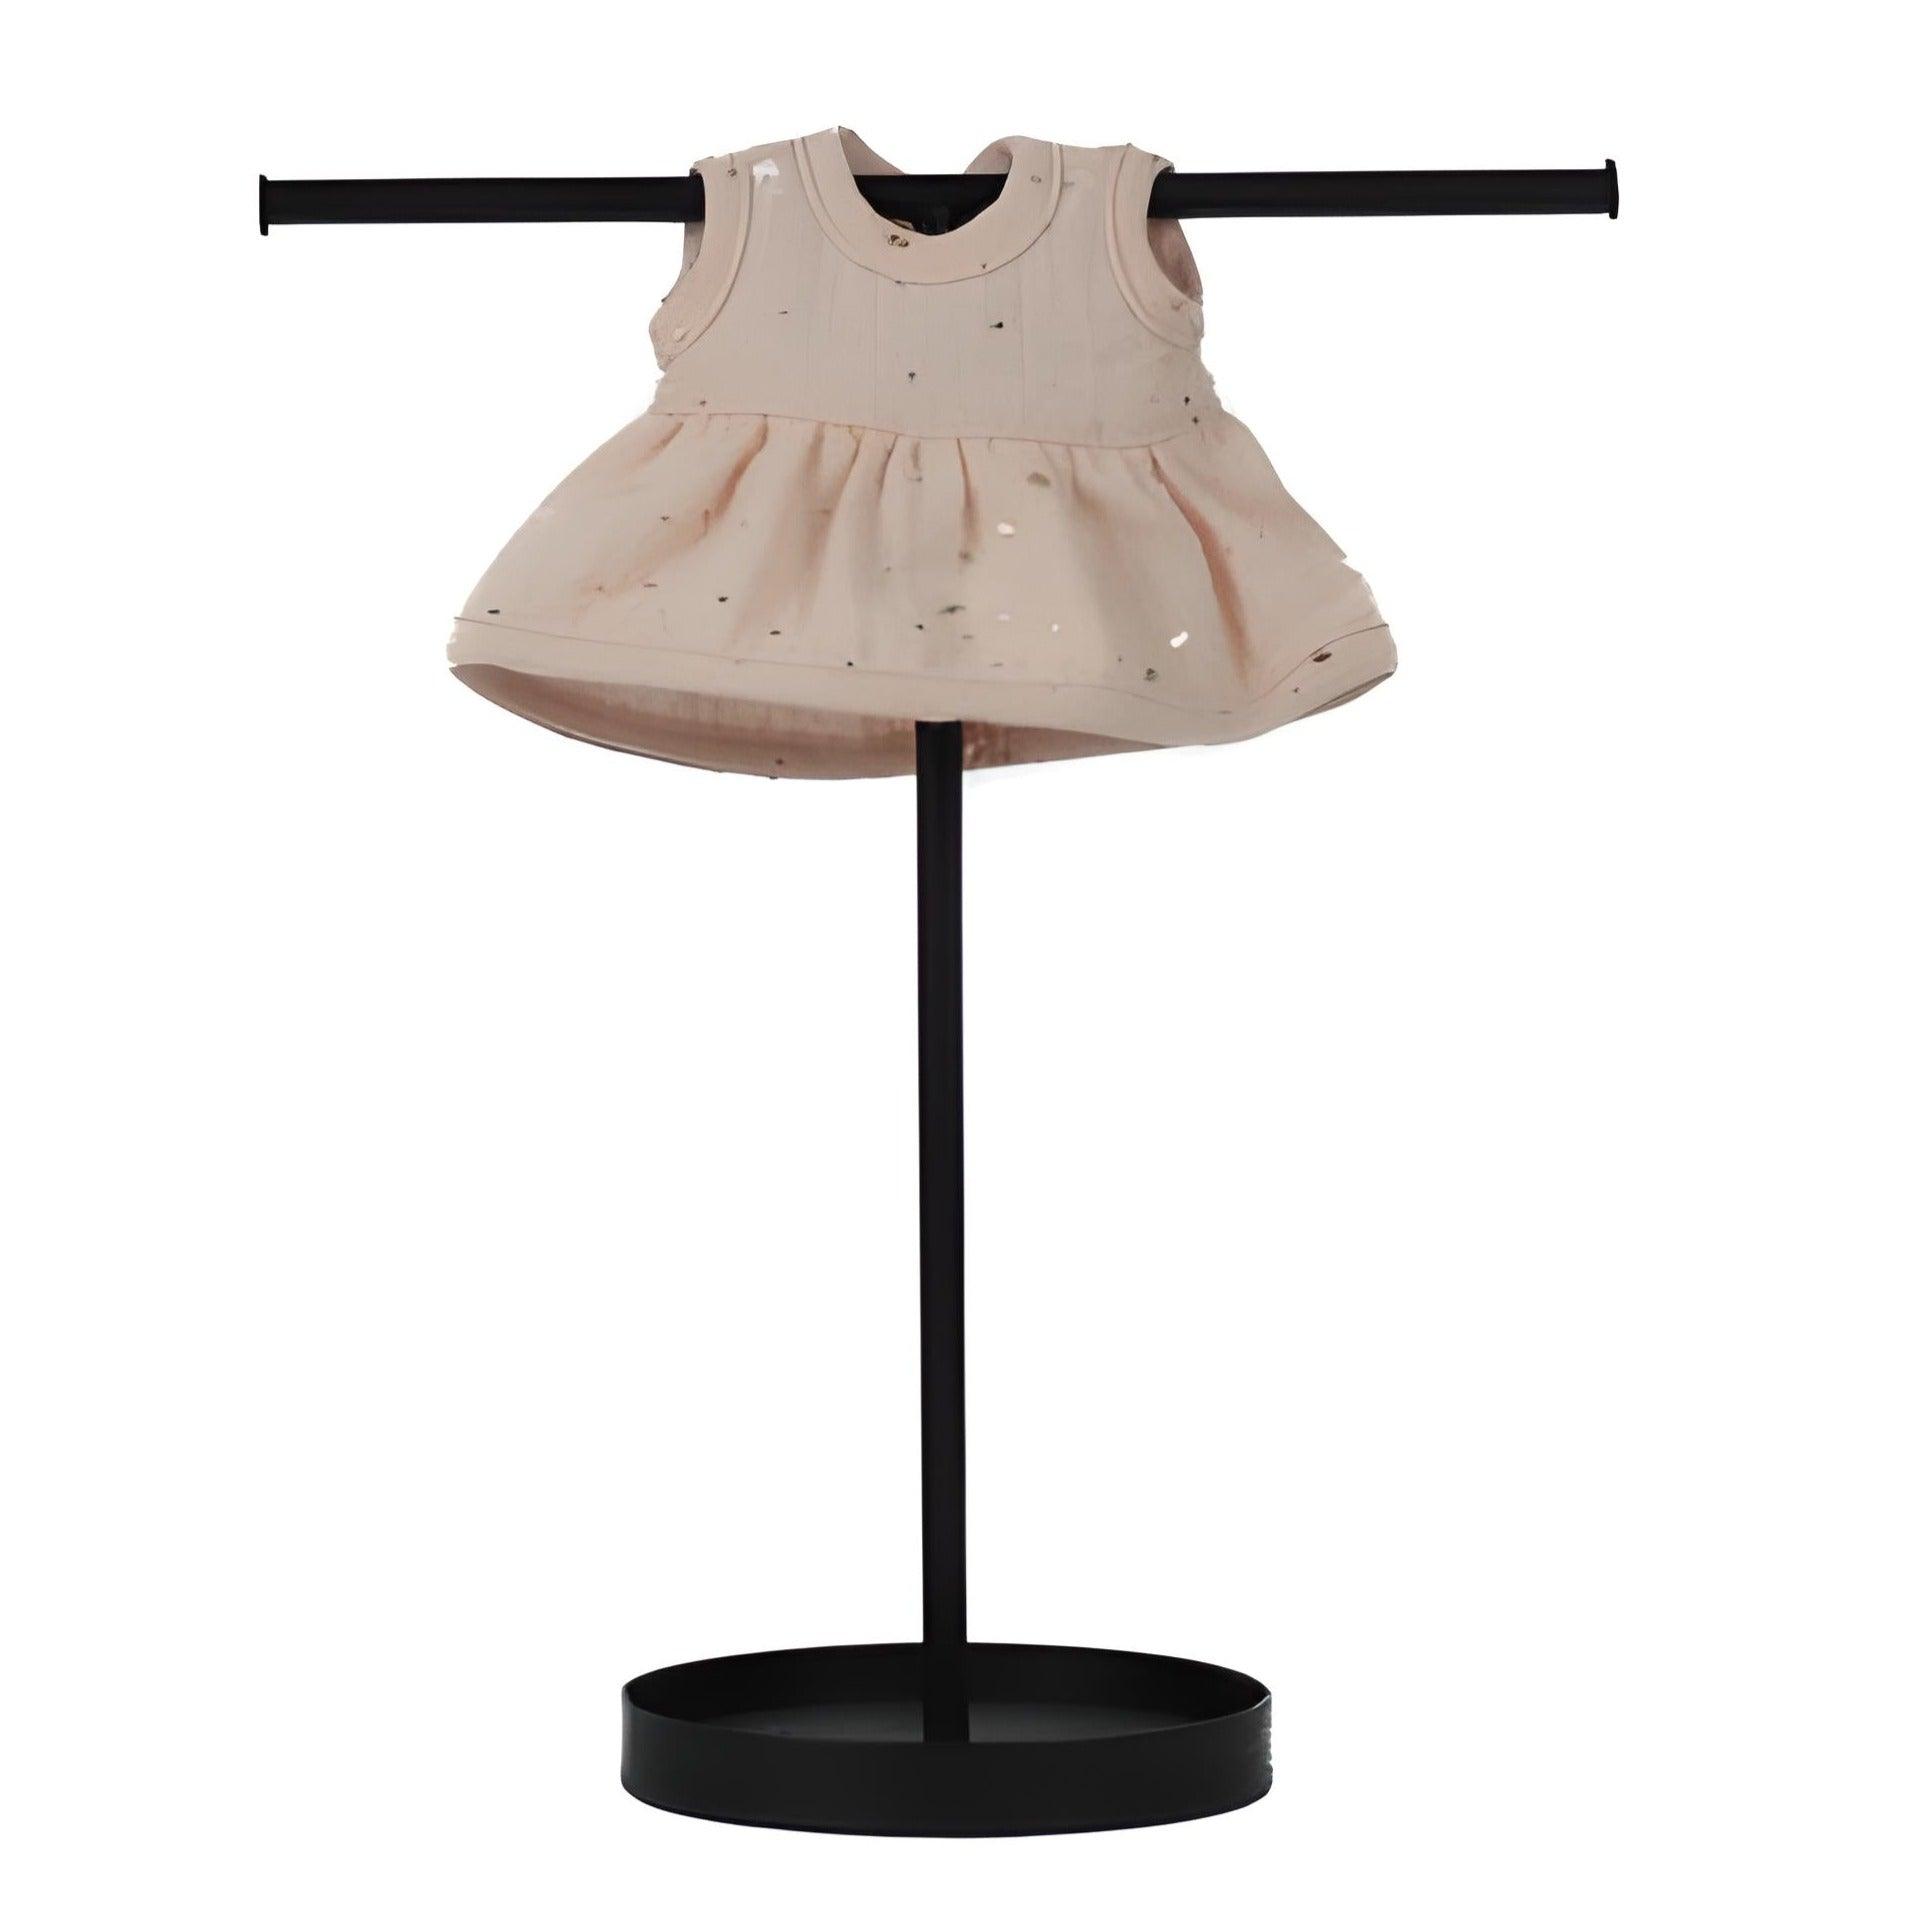 Lillitoy: Gold Dots muslin dress for Miniland 21 cm doll